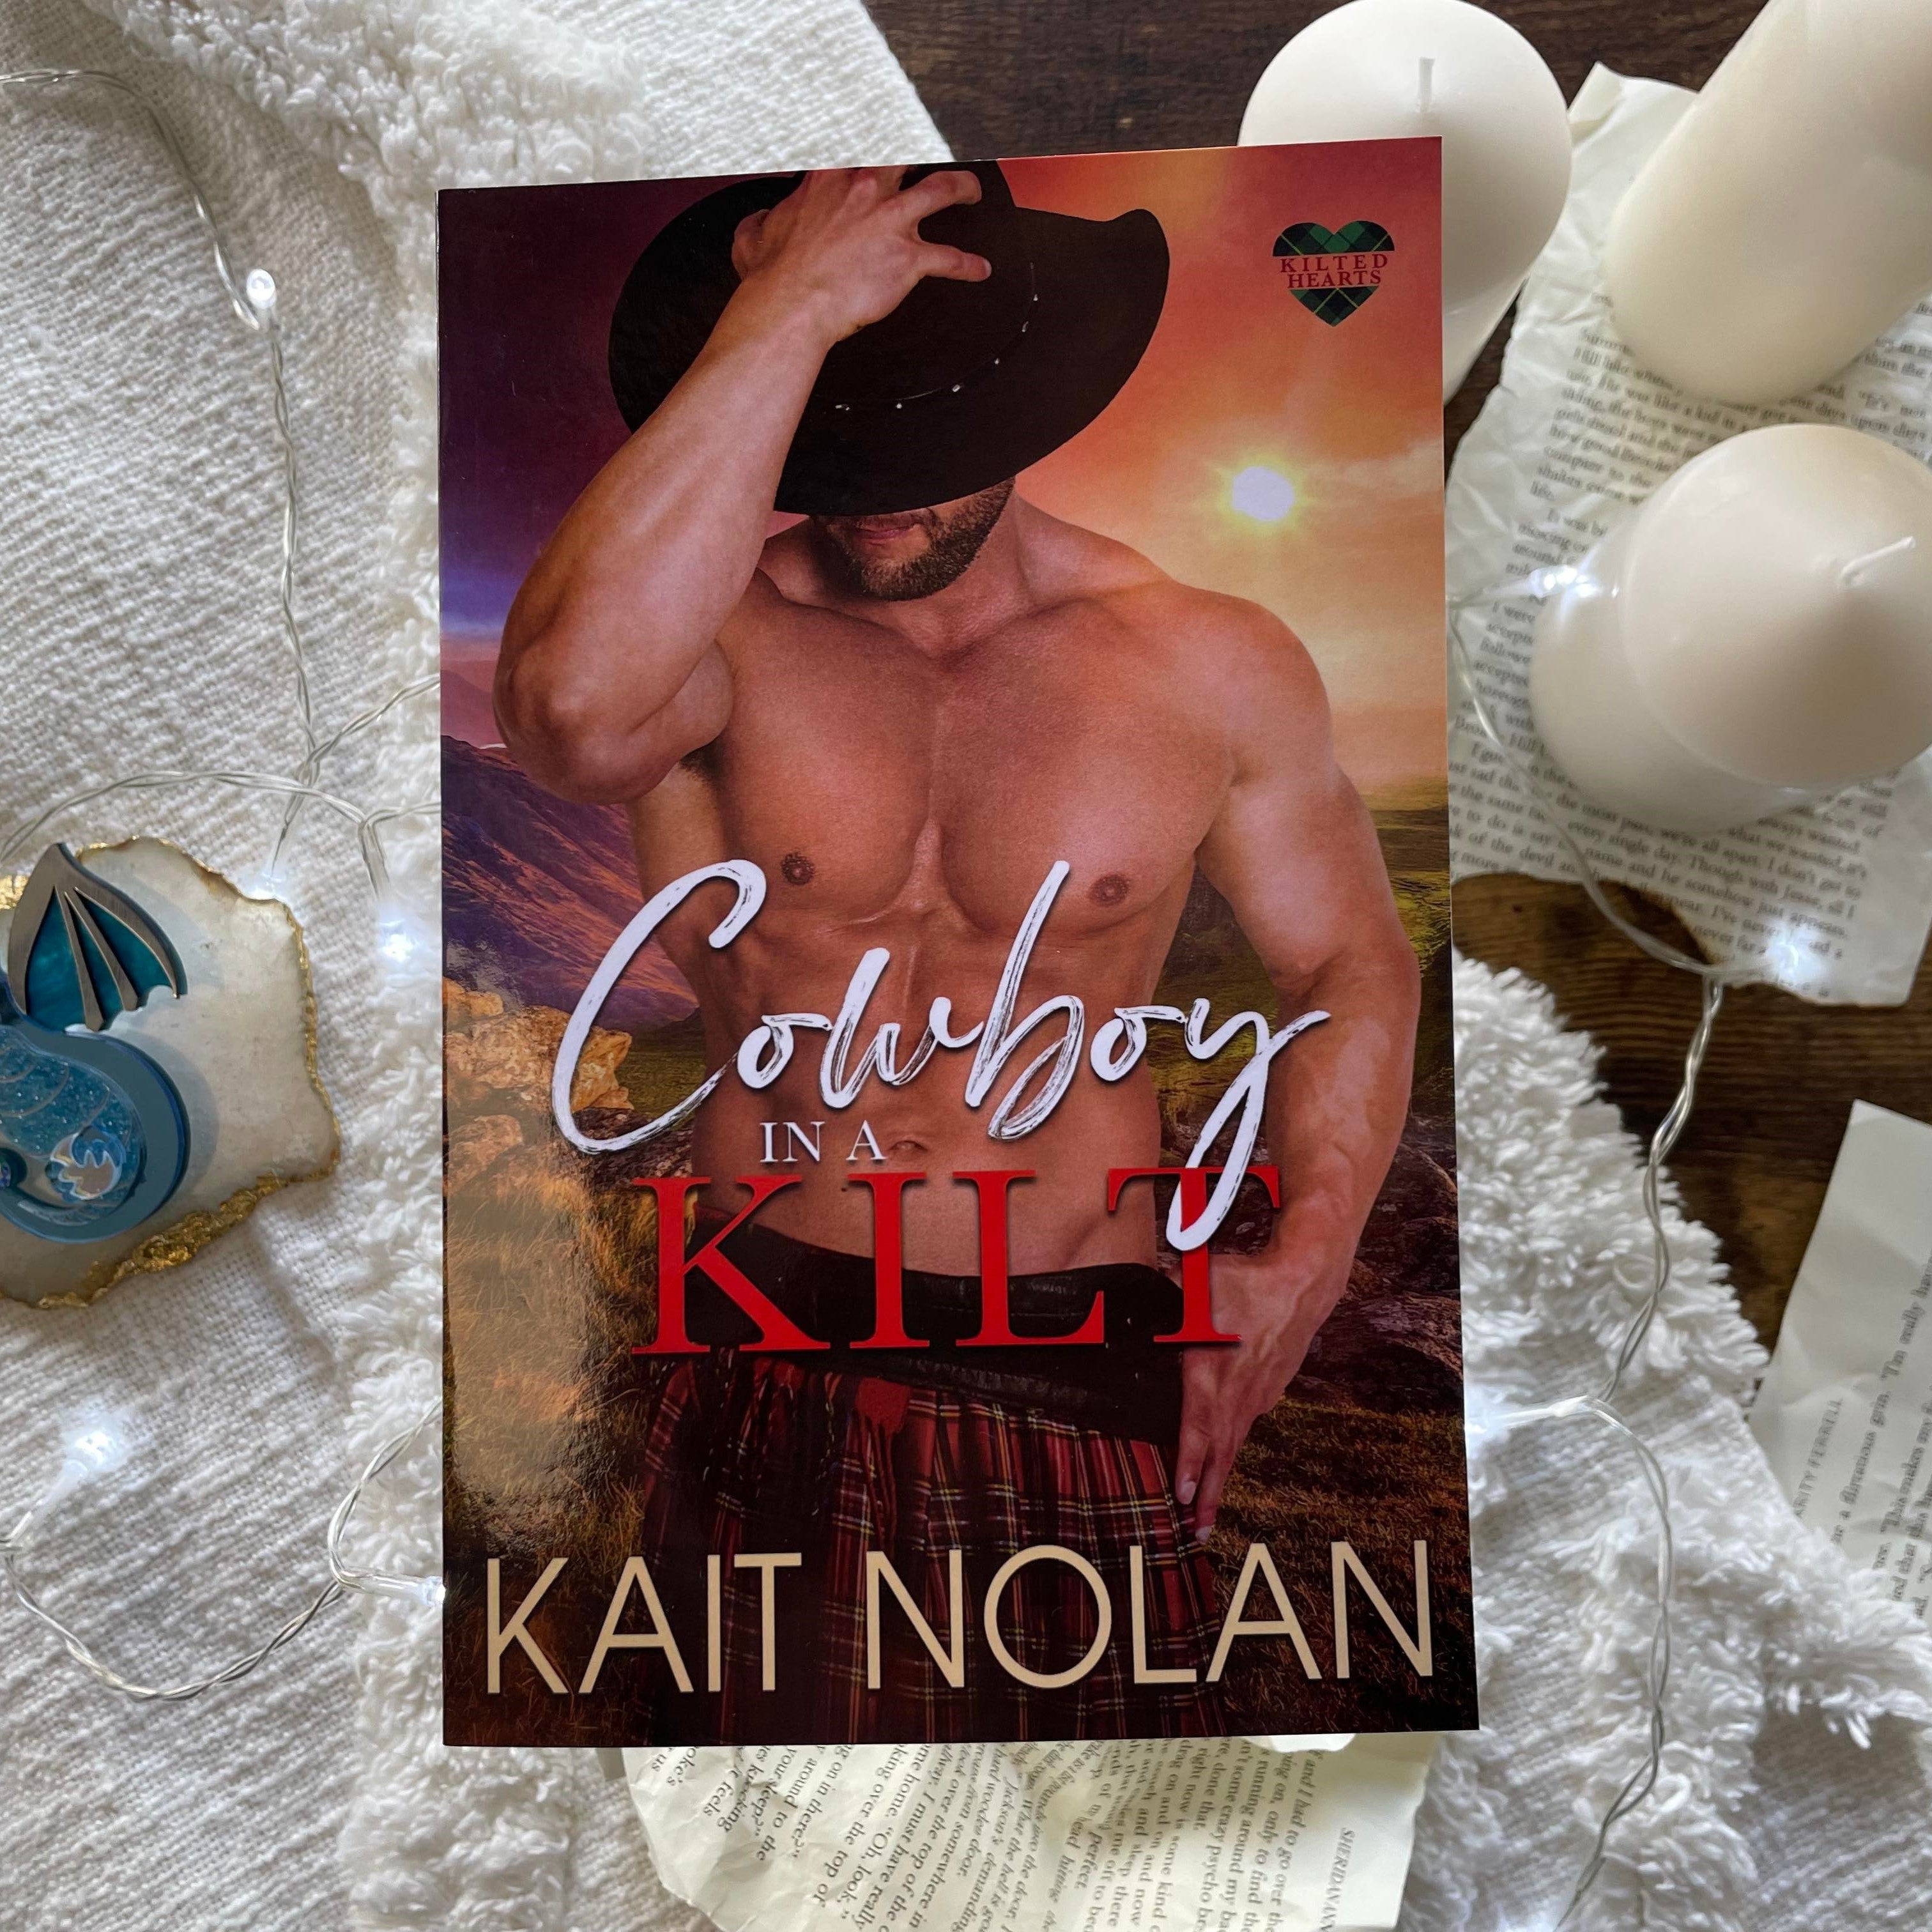 Kitled Hearts by Kait Nolan